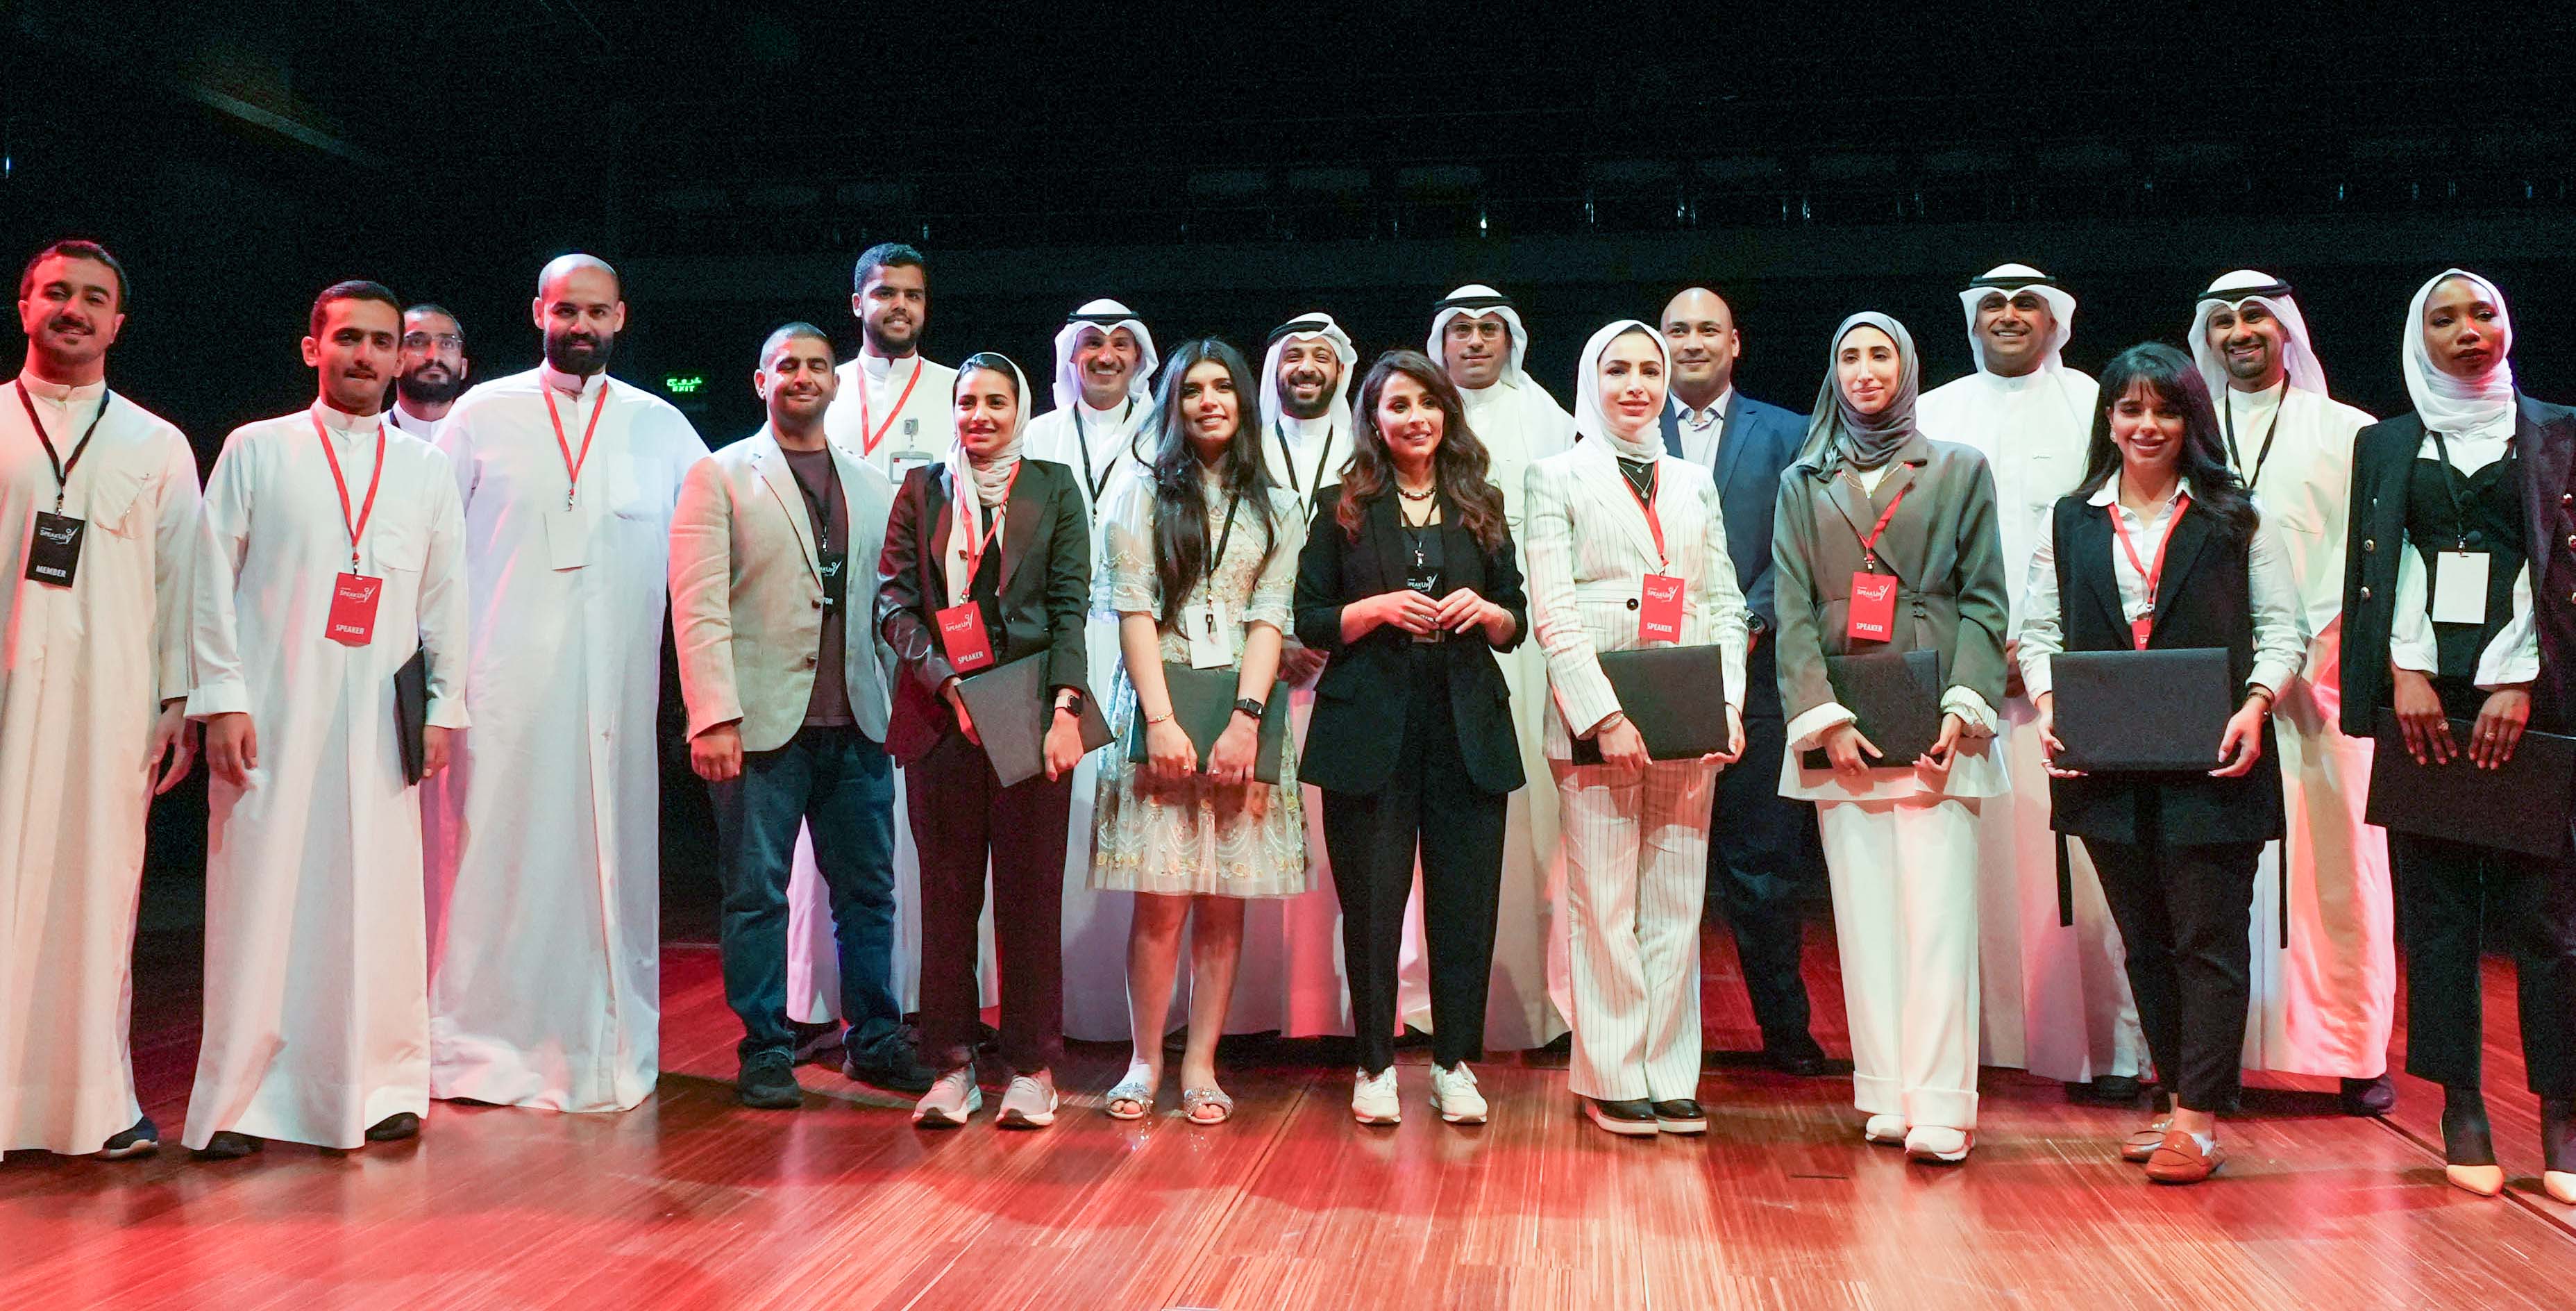 Zain embraces young people, fosters their creative talents